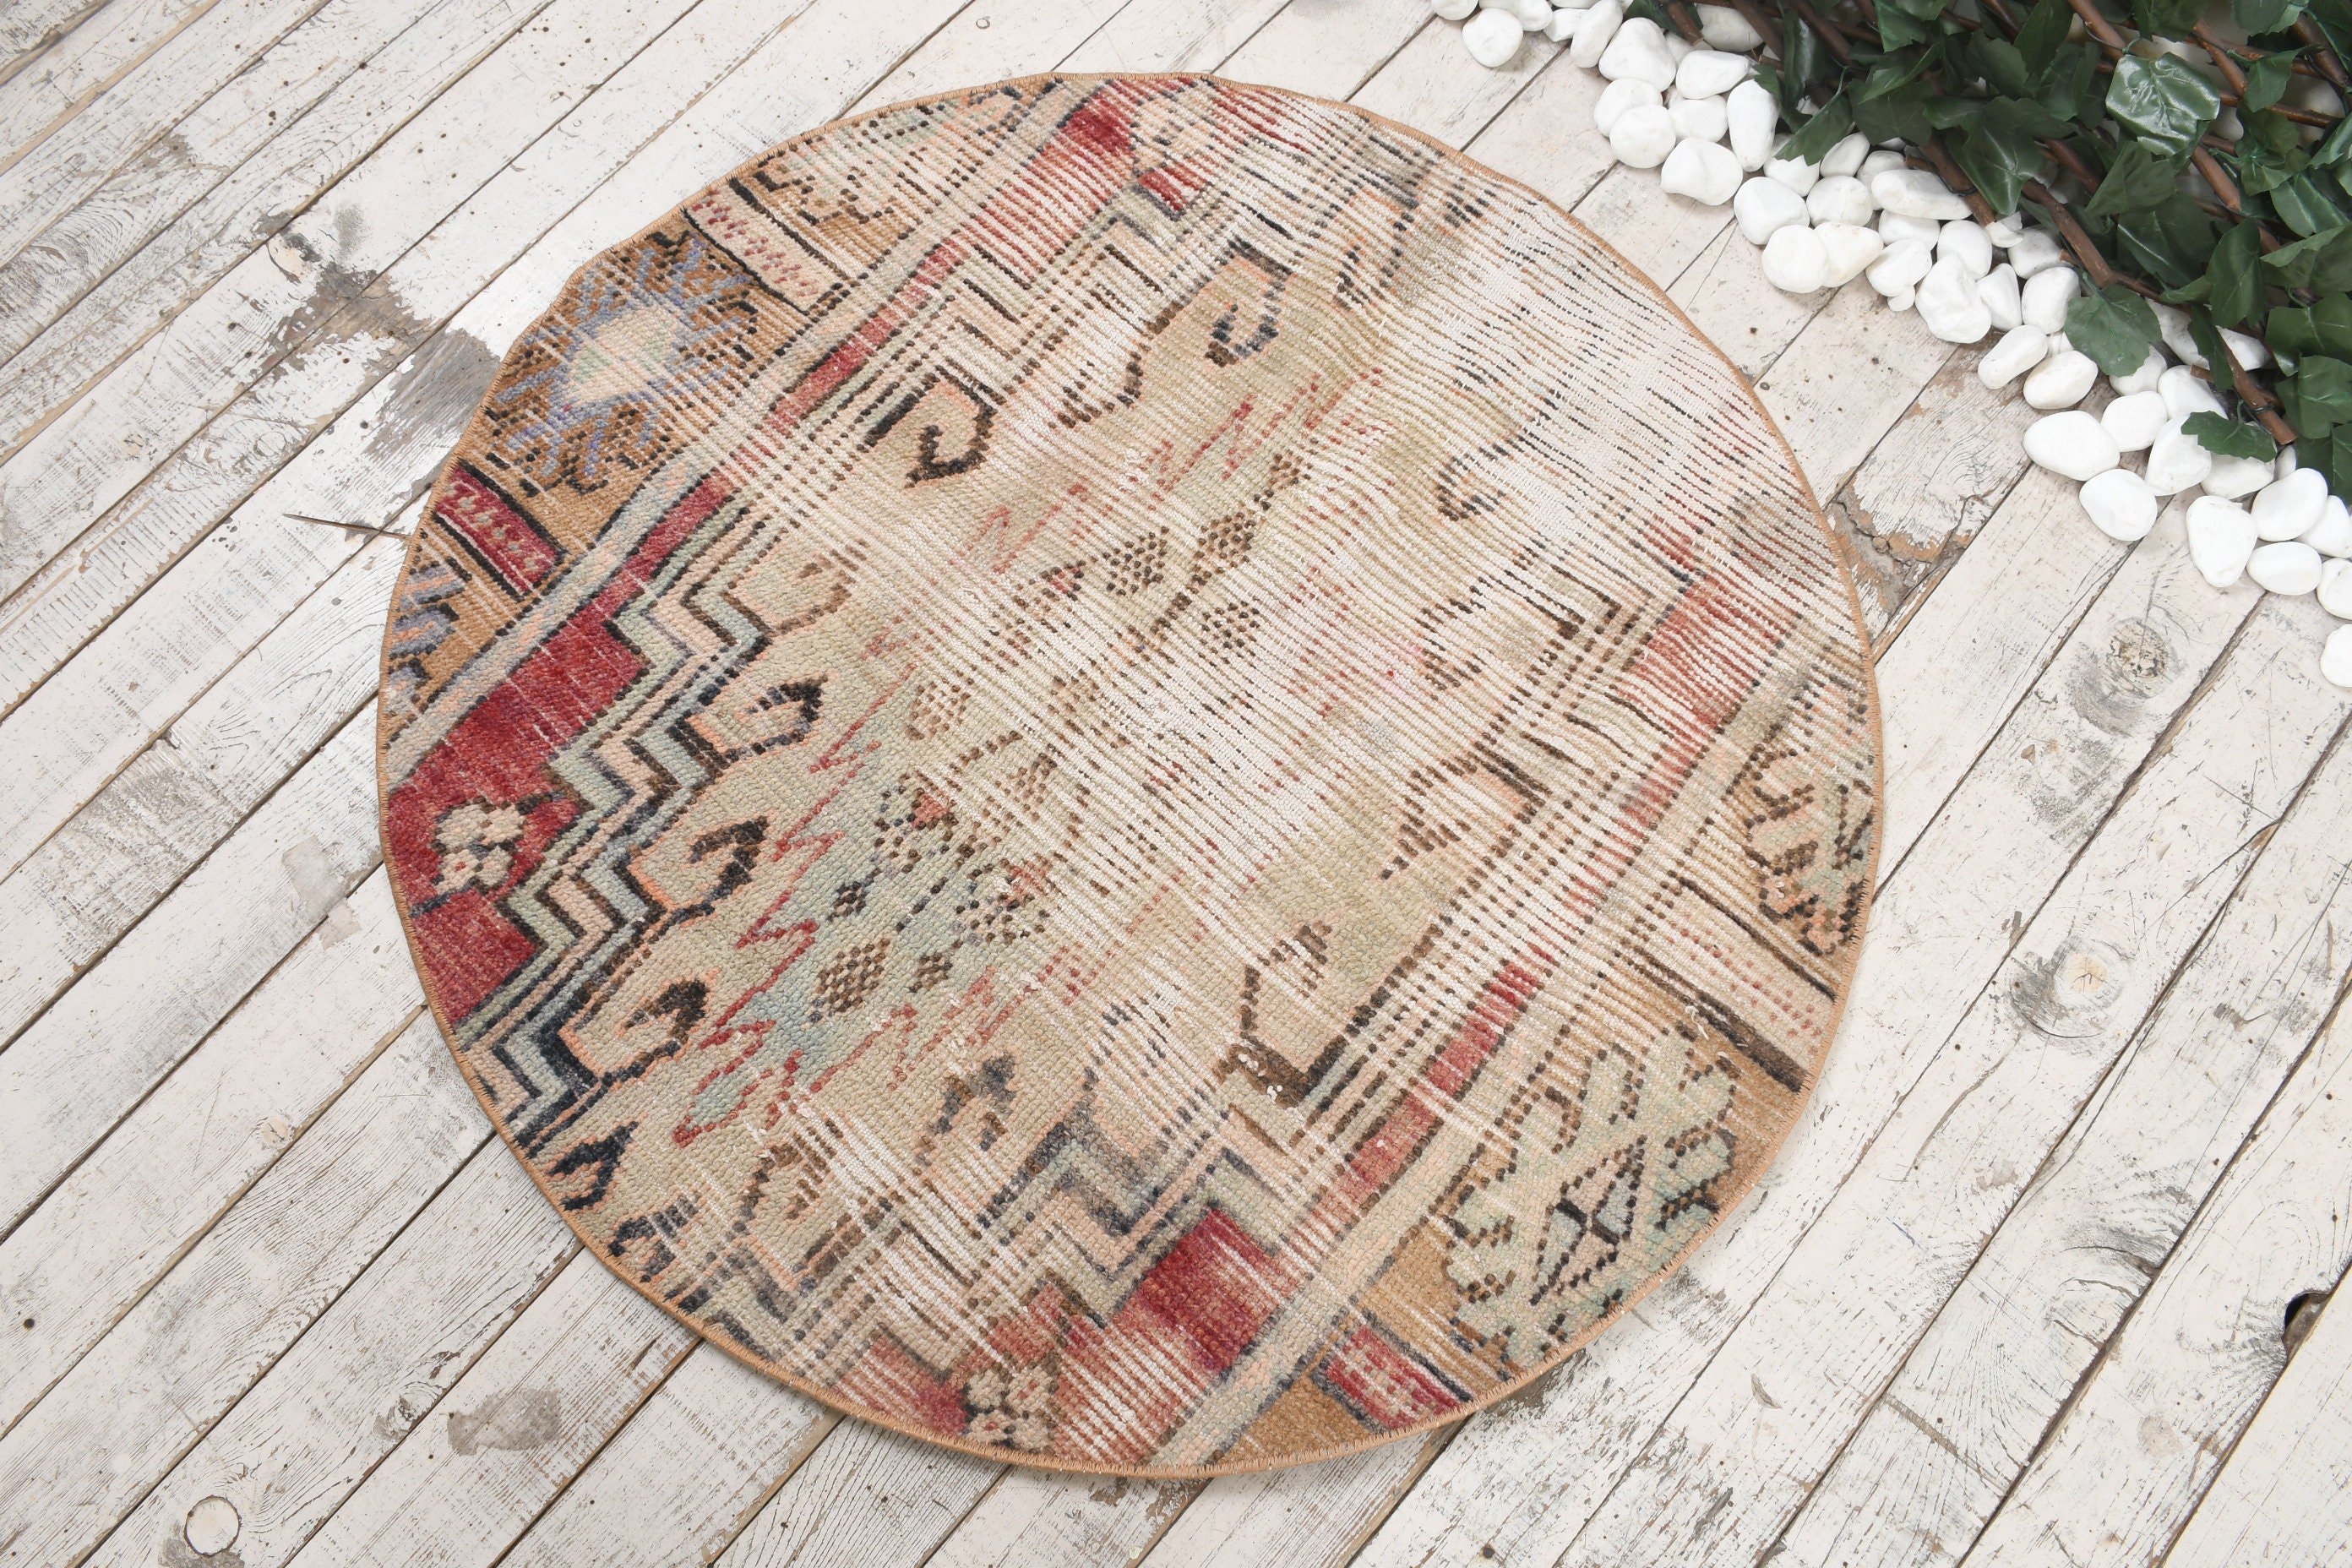 Vintage Rugs, Bath Mat Cute Rug, Moroccan Rug, Bath Rug, Antique Rugs, Turkish Rug, Car Mat Rugs, Rugs for Kitchen, 3x3 ft Small Rugs